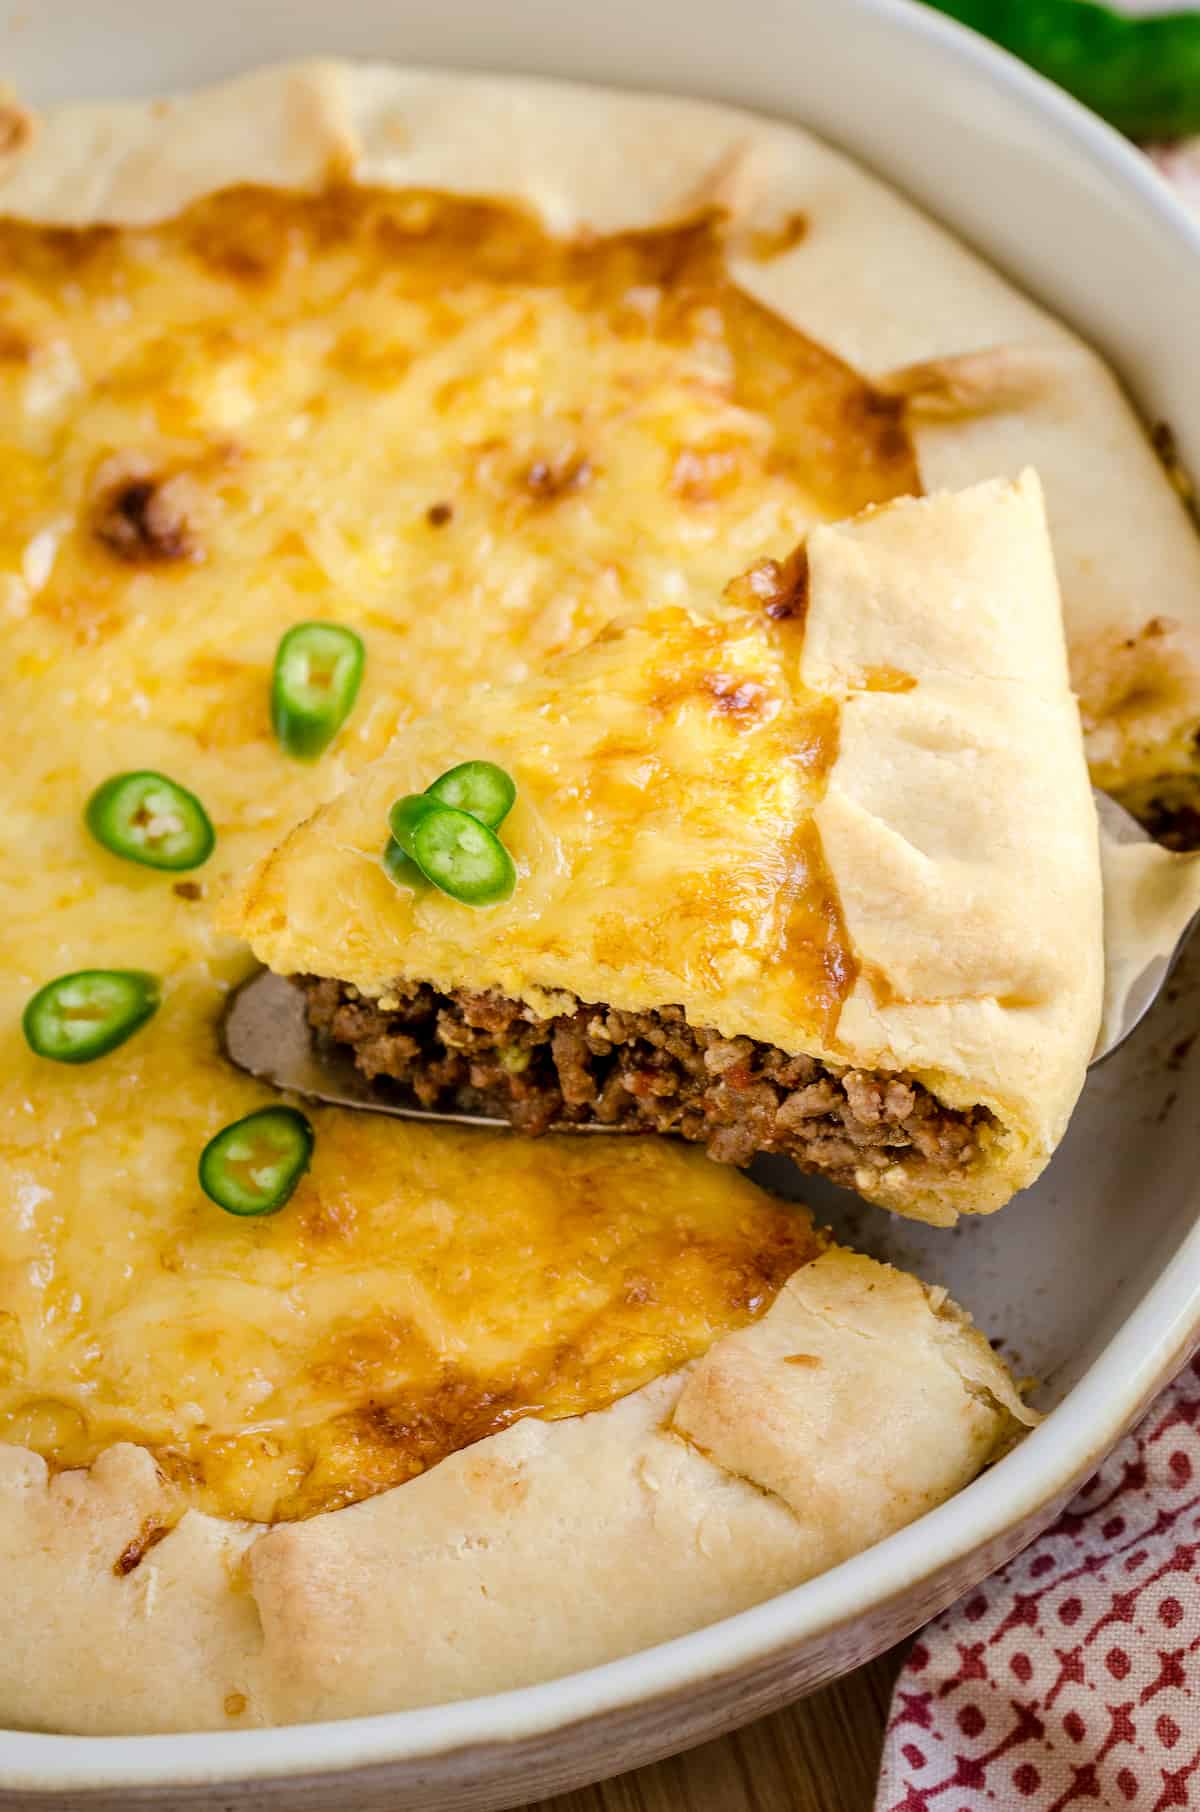 A slice of Tex-Mex cheesy quiche is served from a baking dish.